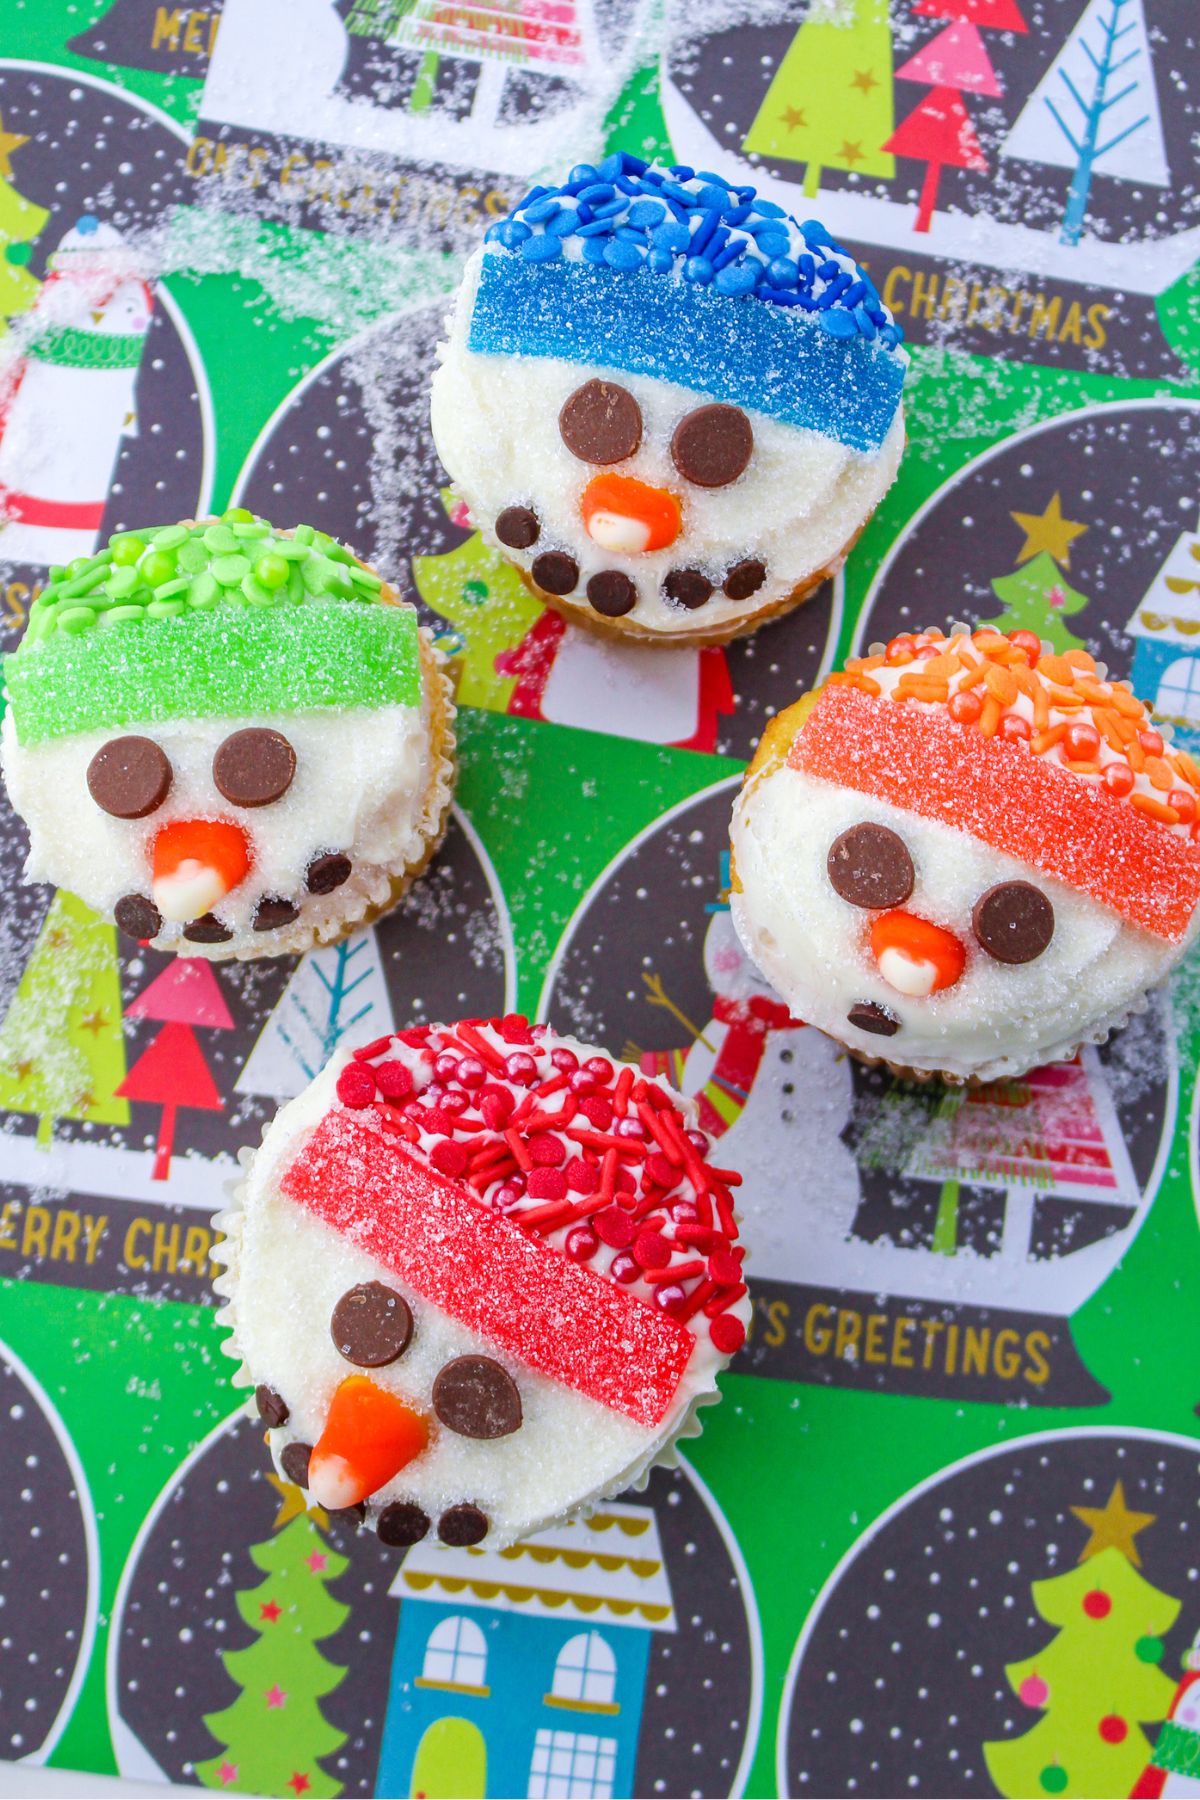 Snowman cupcakes on a green background.